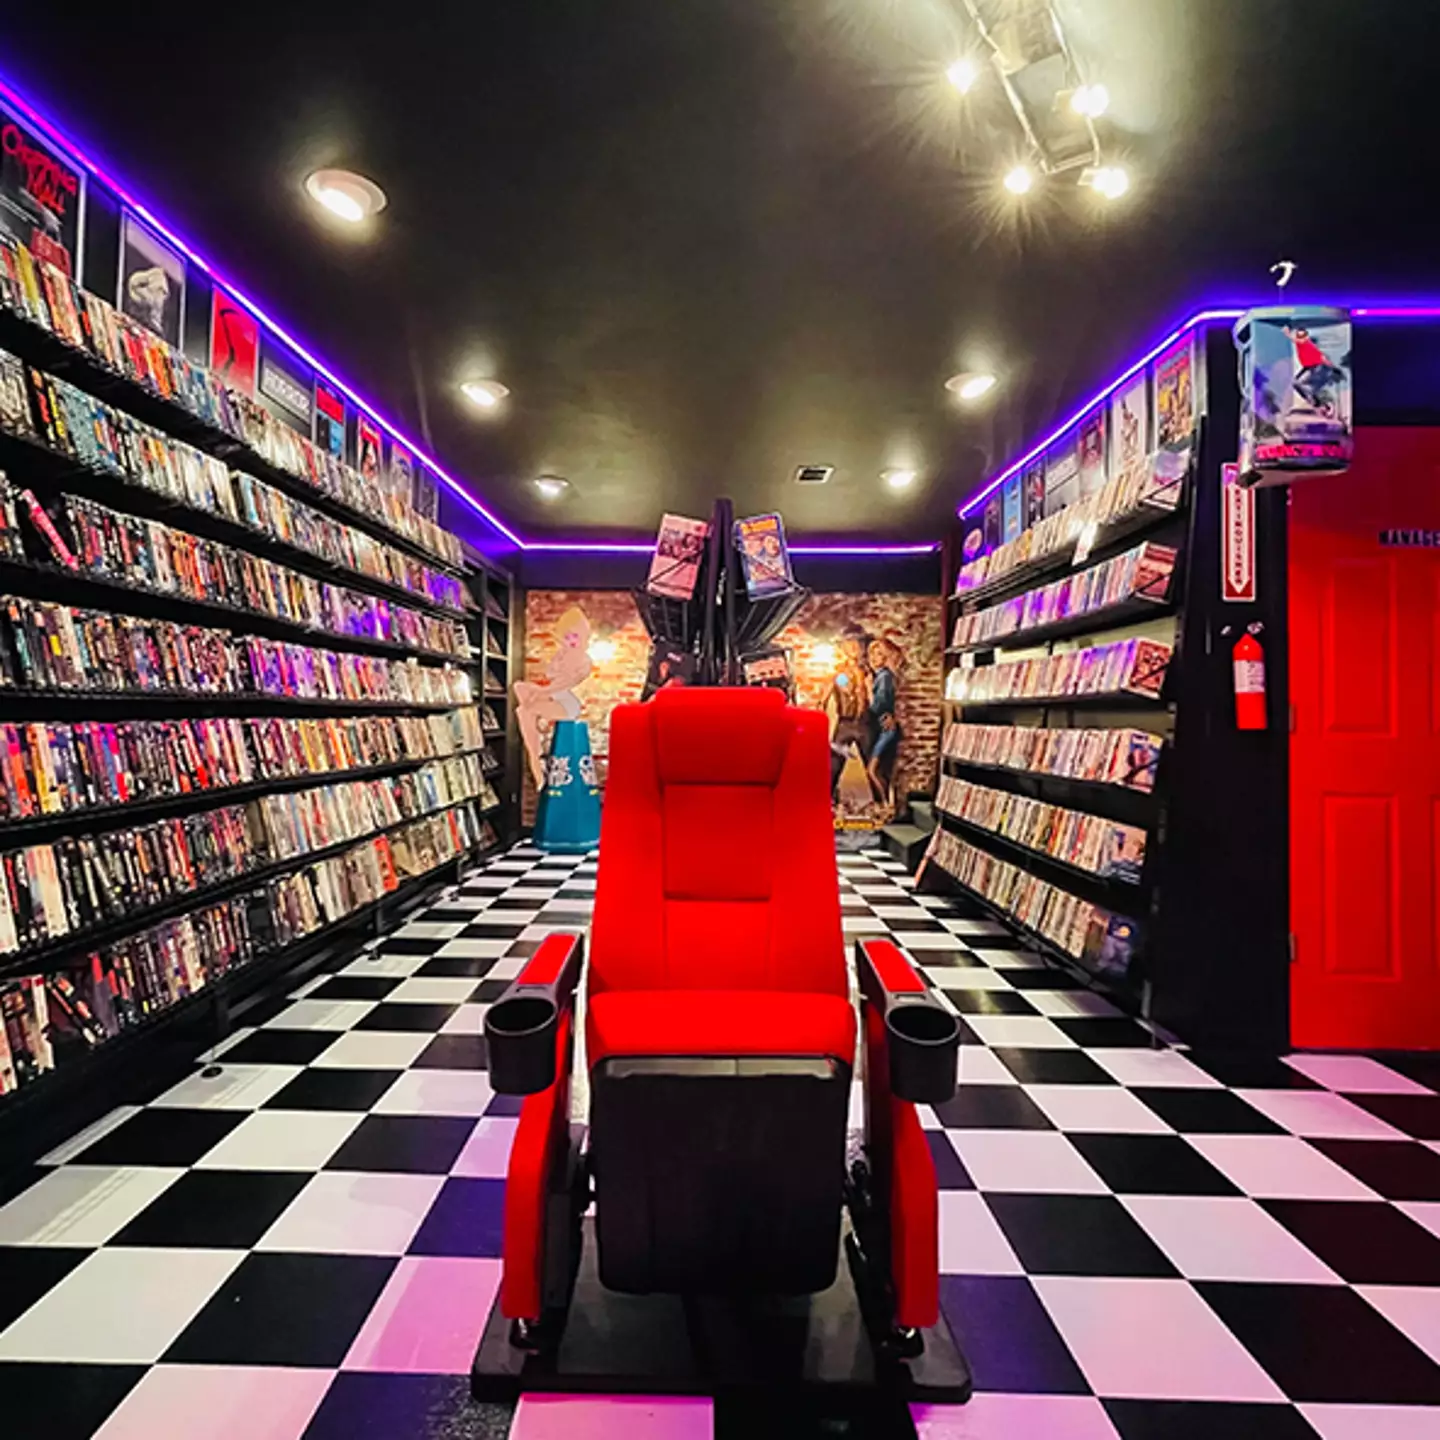 Man leaves people amazed after building ‘dream 80’s video store’ in his basement